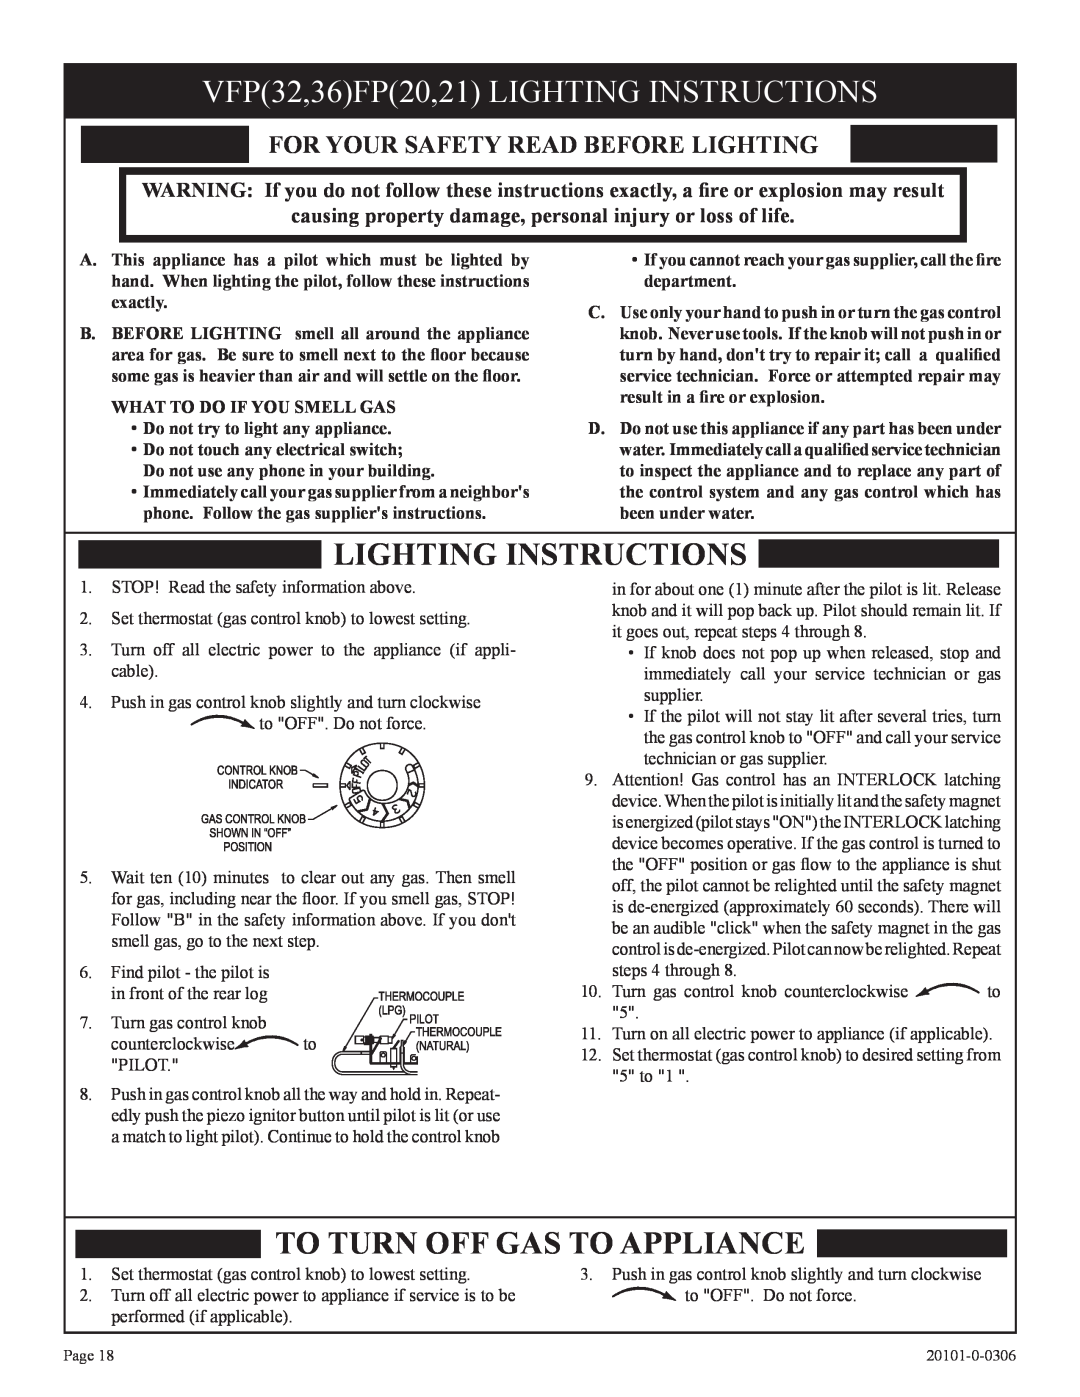 Empire Comfort Systems P)-1, VFP36FP, VFP32FP VFP32,36FP20,21 LIGHTING INSTRUCTIONS, For Your Safety Read Before Lighting 